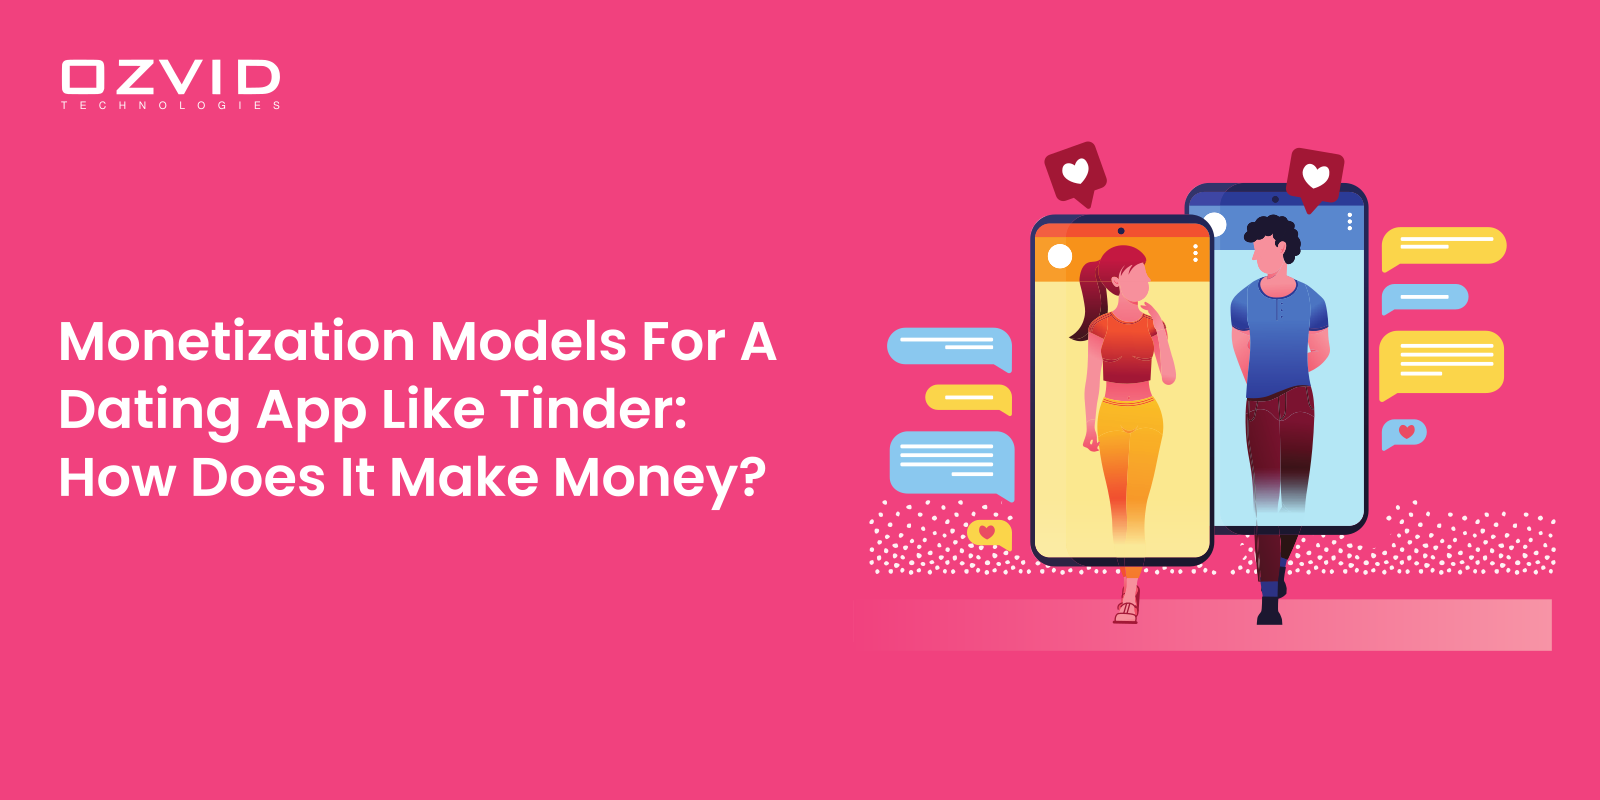 Monetization Models For A Dating App Like Tinder: How Does It Make Money?